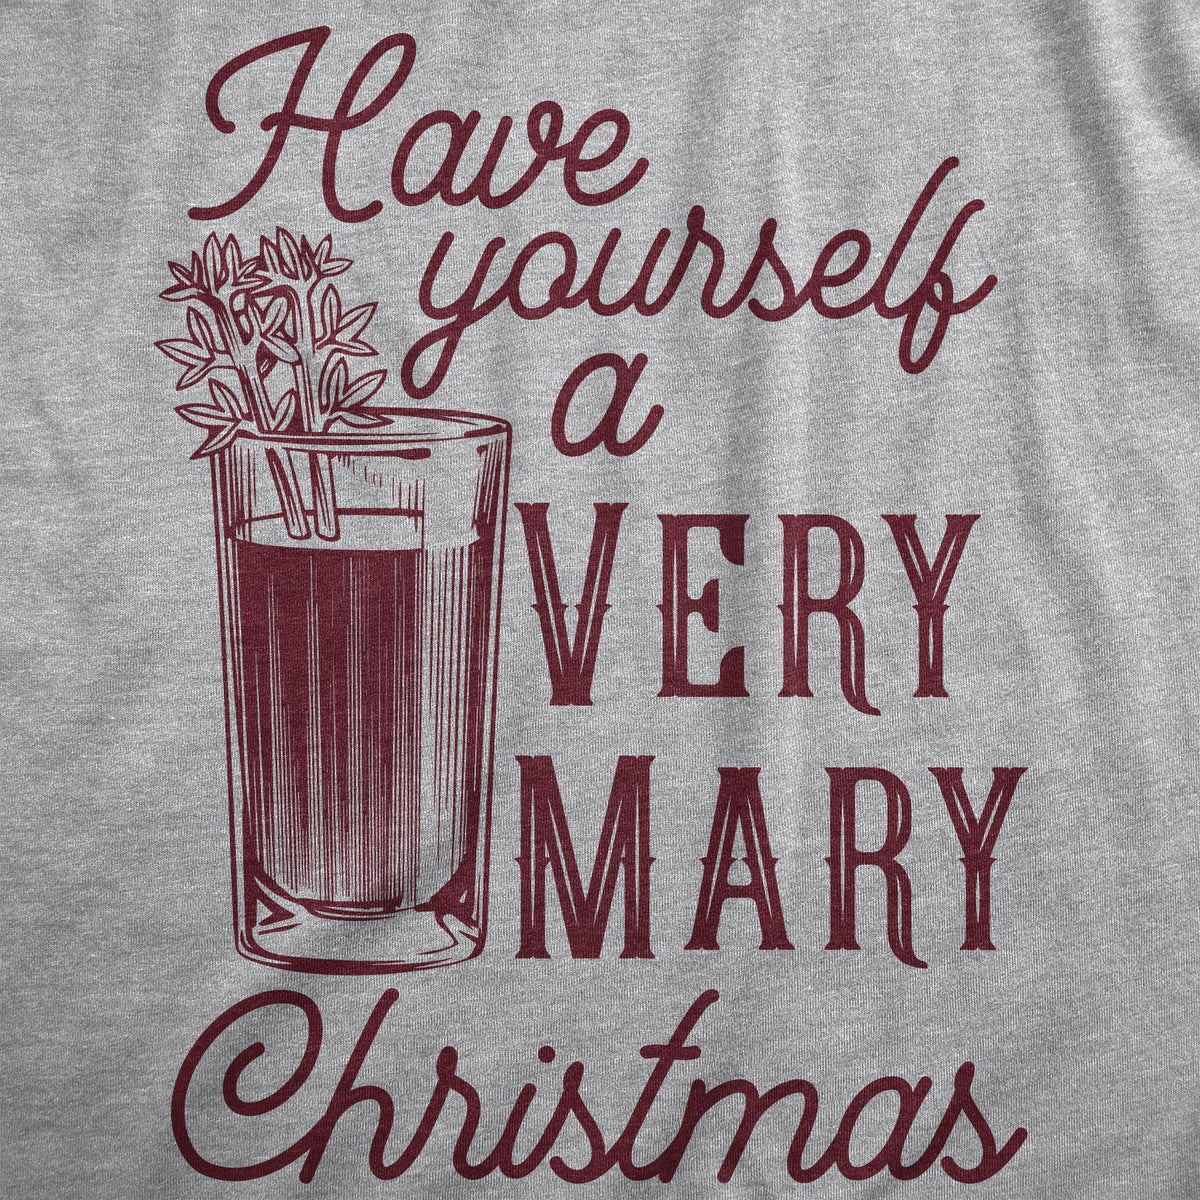 Have Yourself A Very Mary Christmas Women&#39;s Tshirt  -  Crazy Dog T-Shirts